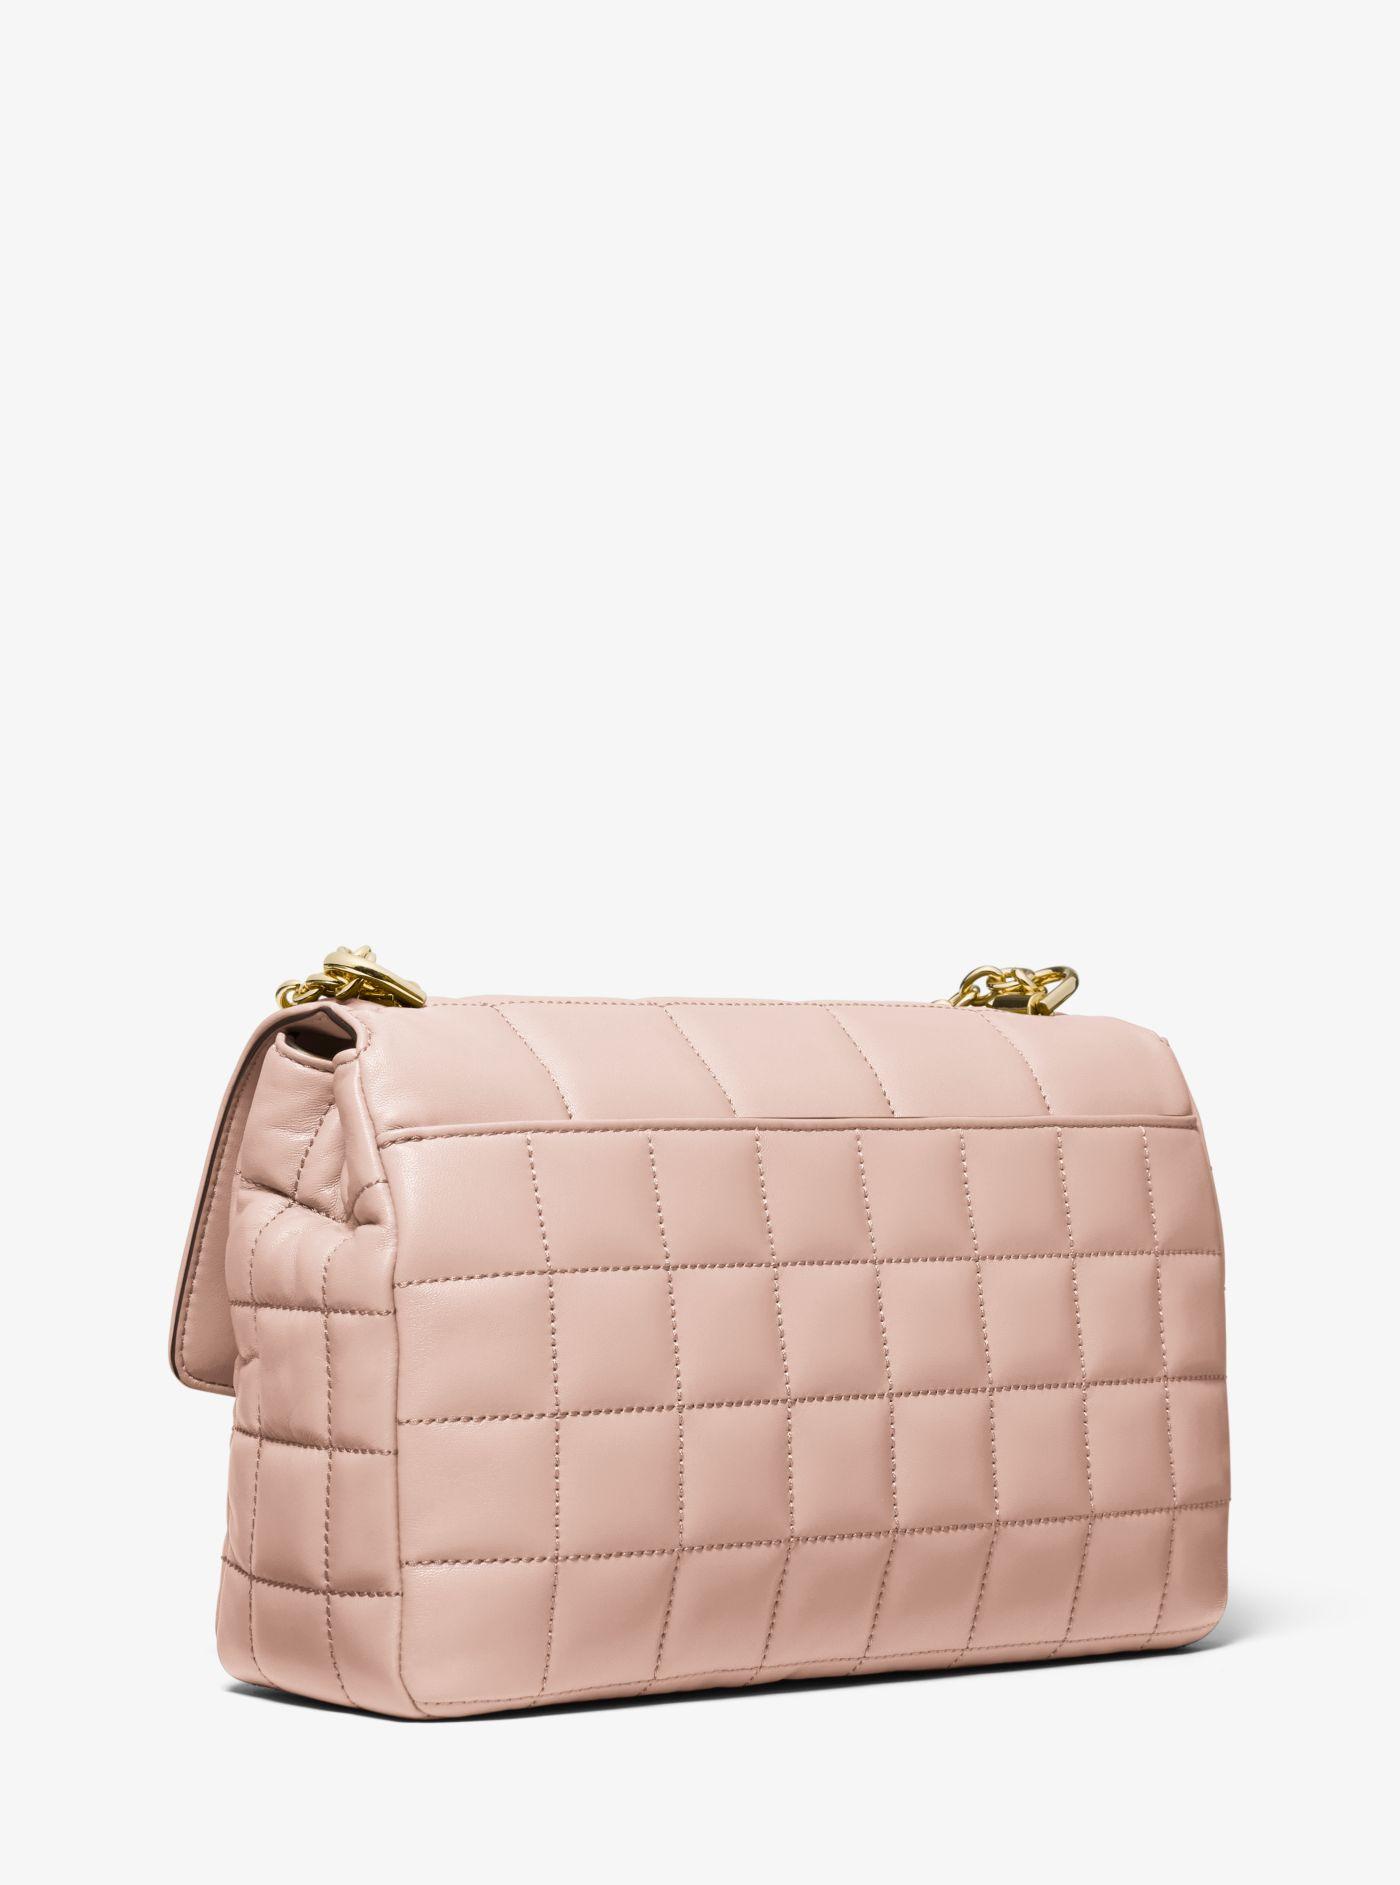 MICHAEL Michael Kors Soho Large Quilted Leather Shoulder Bag in Pink | Lyst